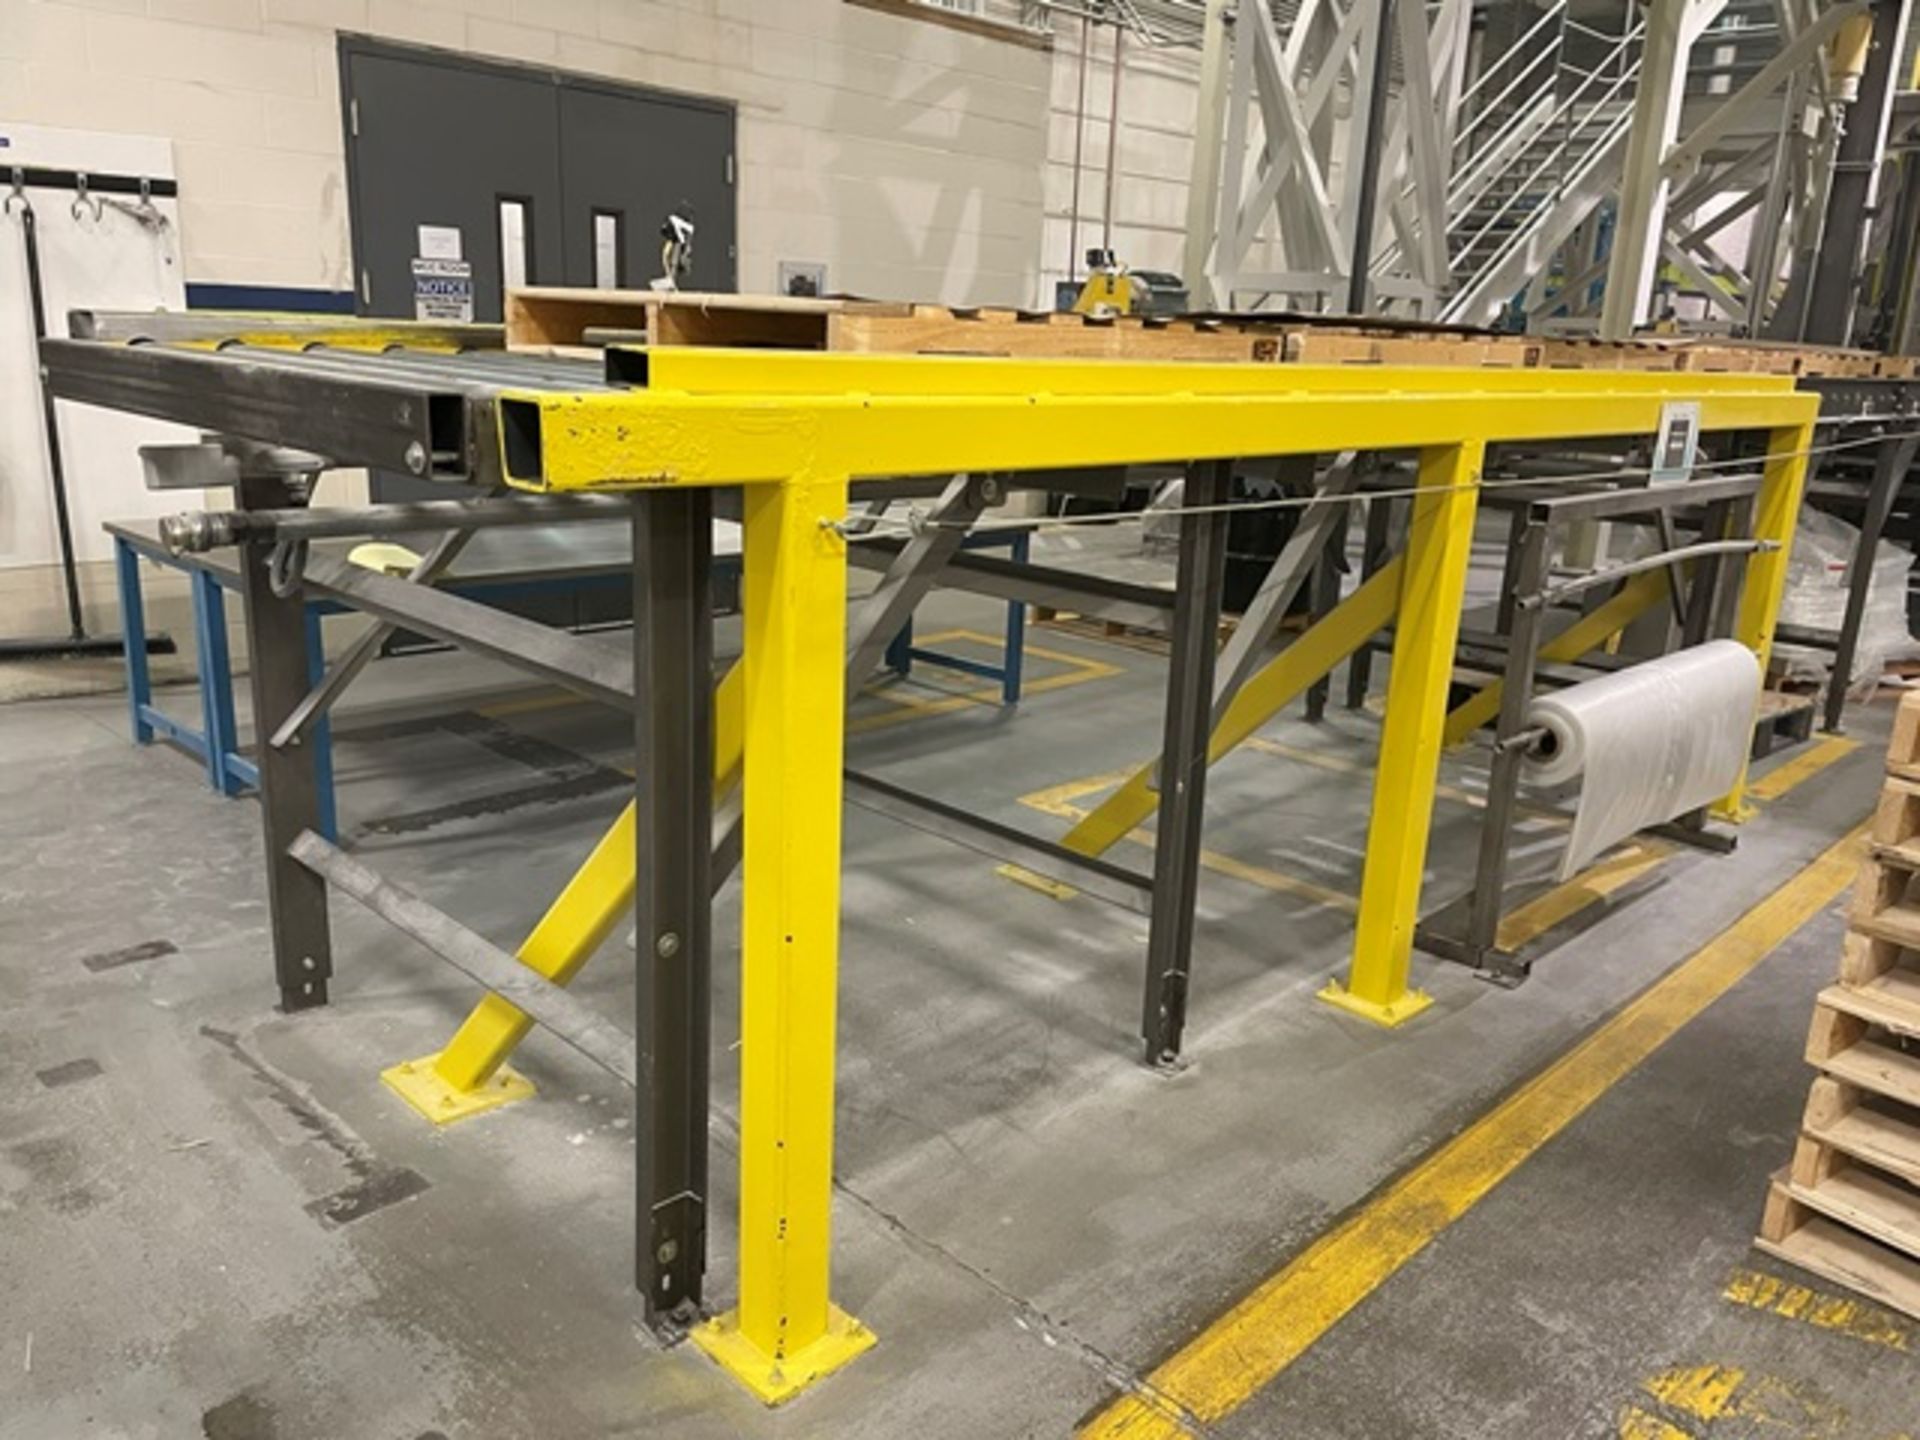 Motorized Roller Conveyor, Approx. 30' Total Length - Image 2 of 3